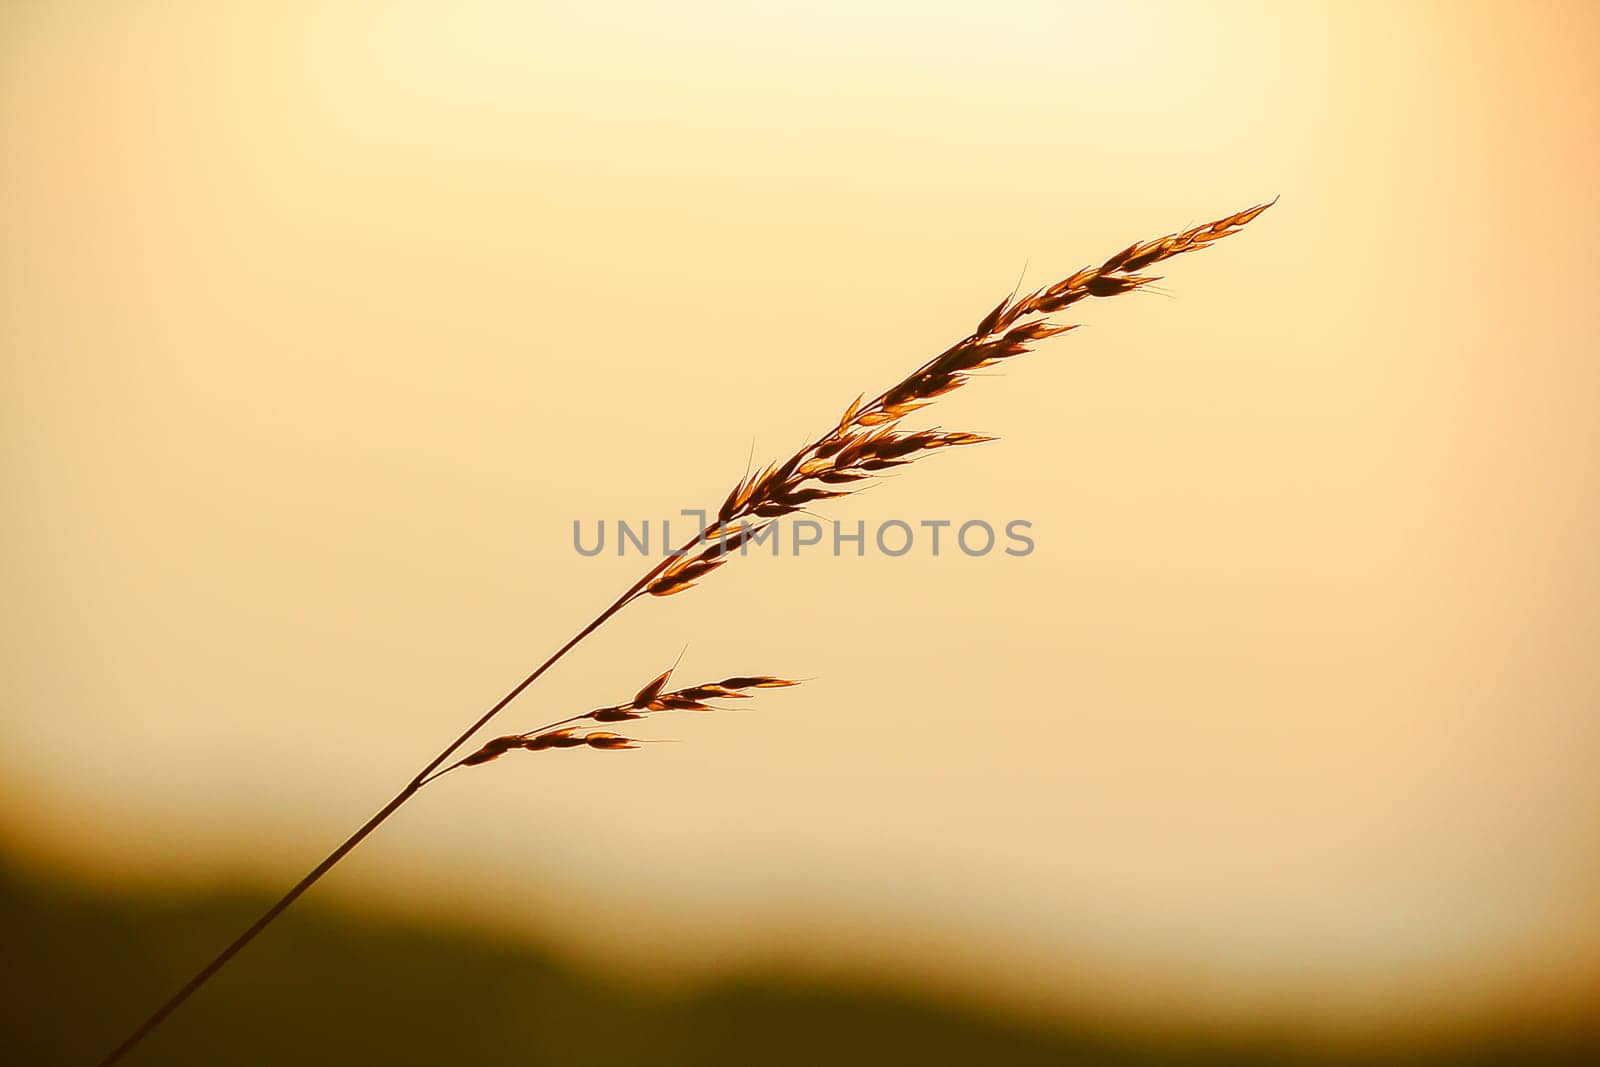 The silhouette of the grass and the sun